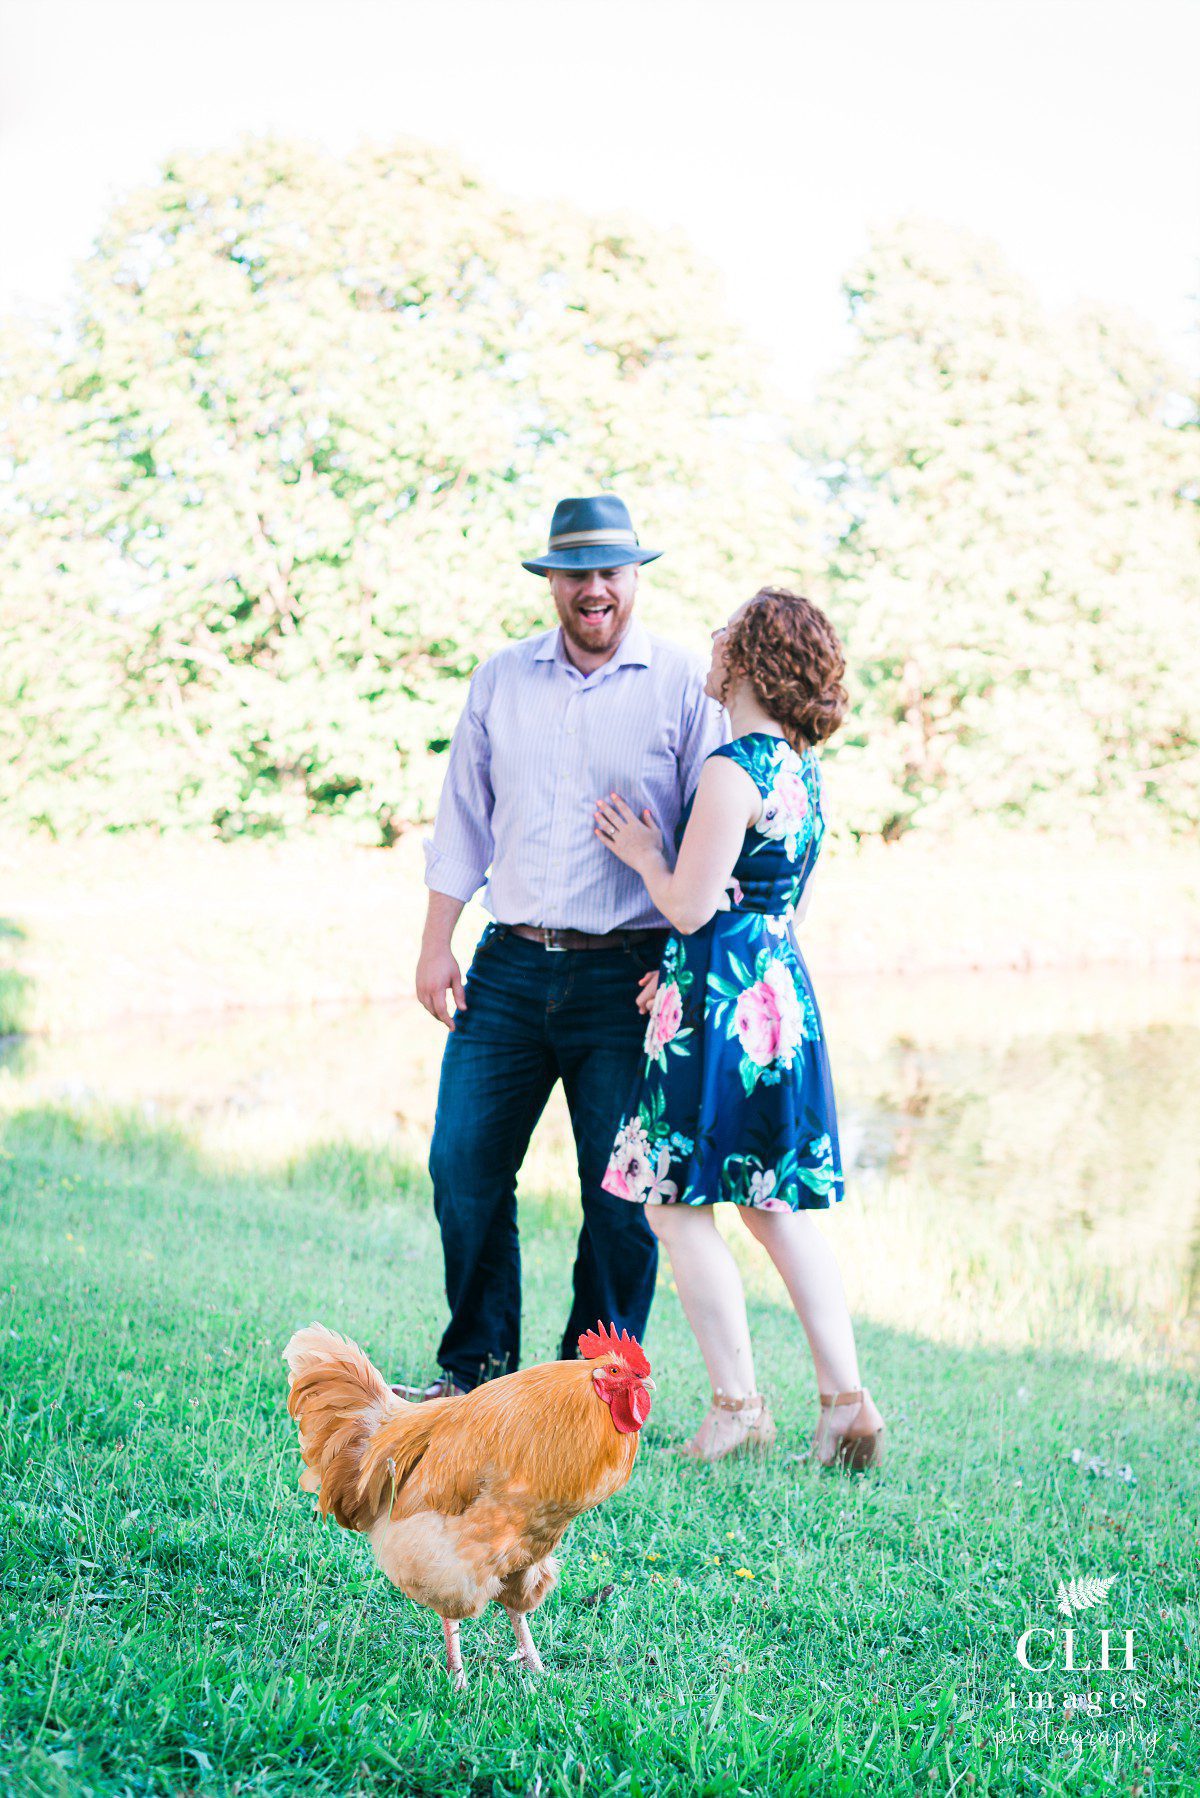 CLH images Photography - Country Engagement Session - Delanson New York - Engagement Photographer - Ashley and Peter (37)